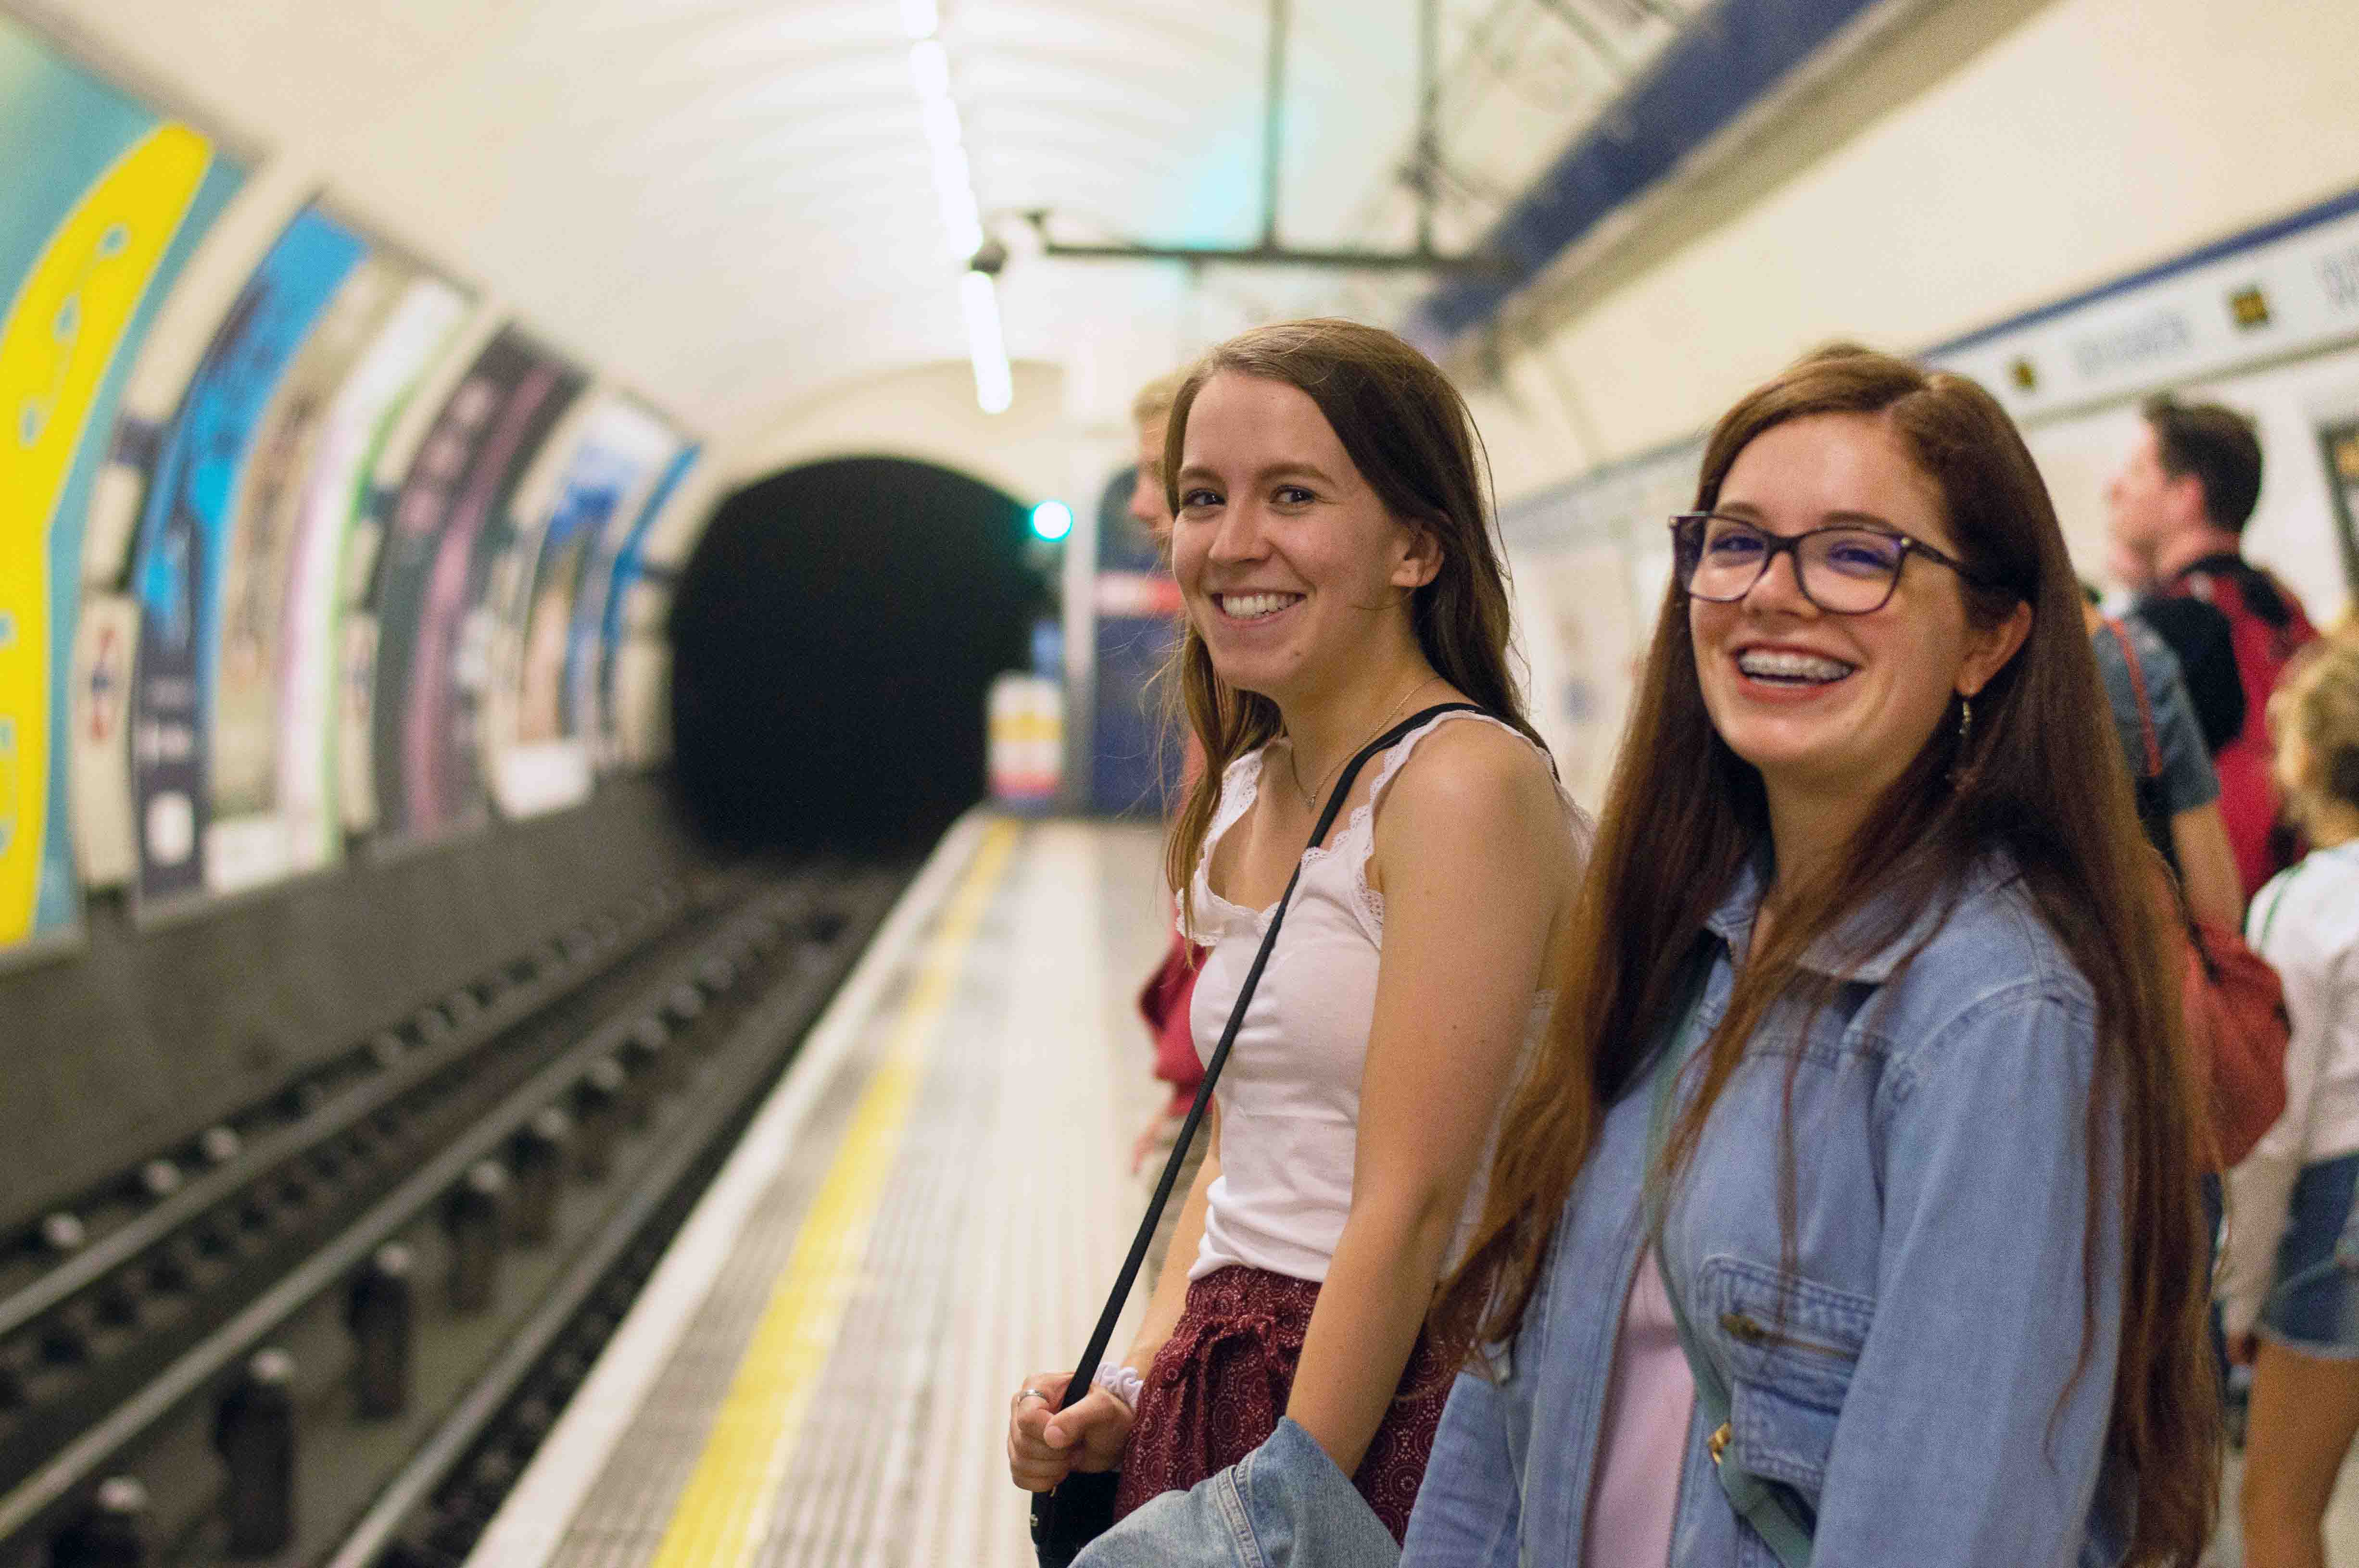 Two students in the London tube in London, England.